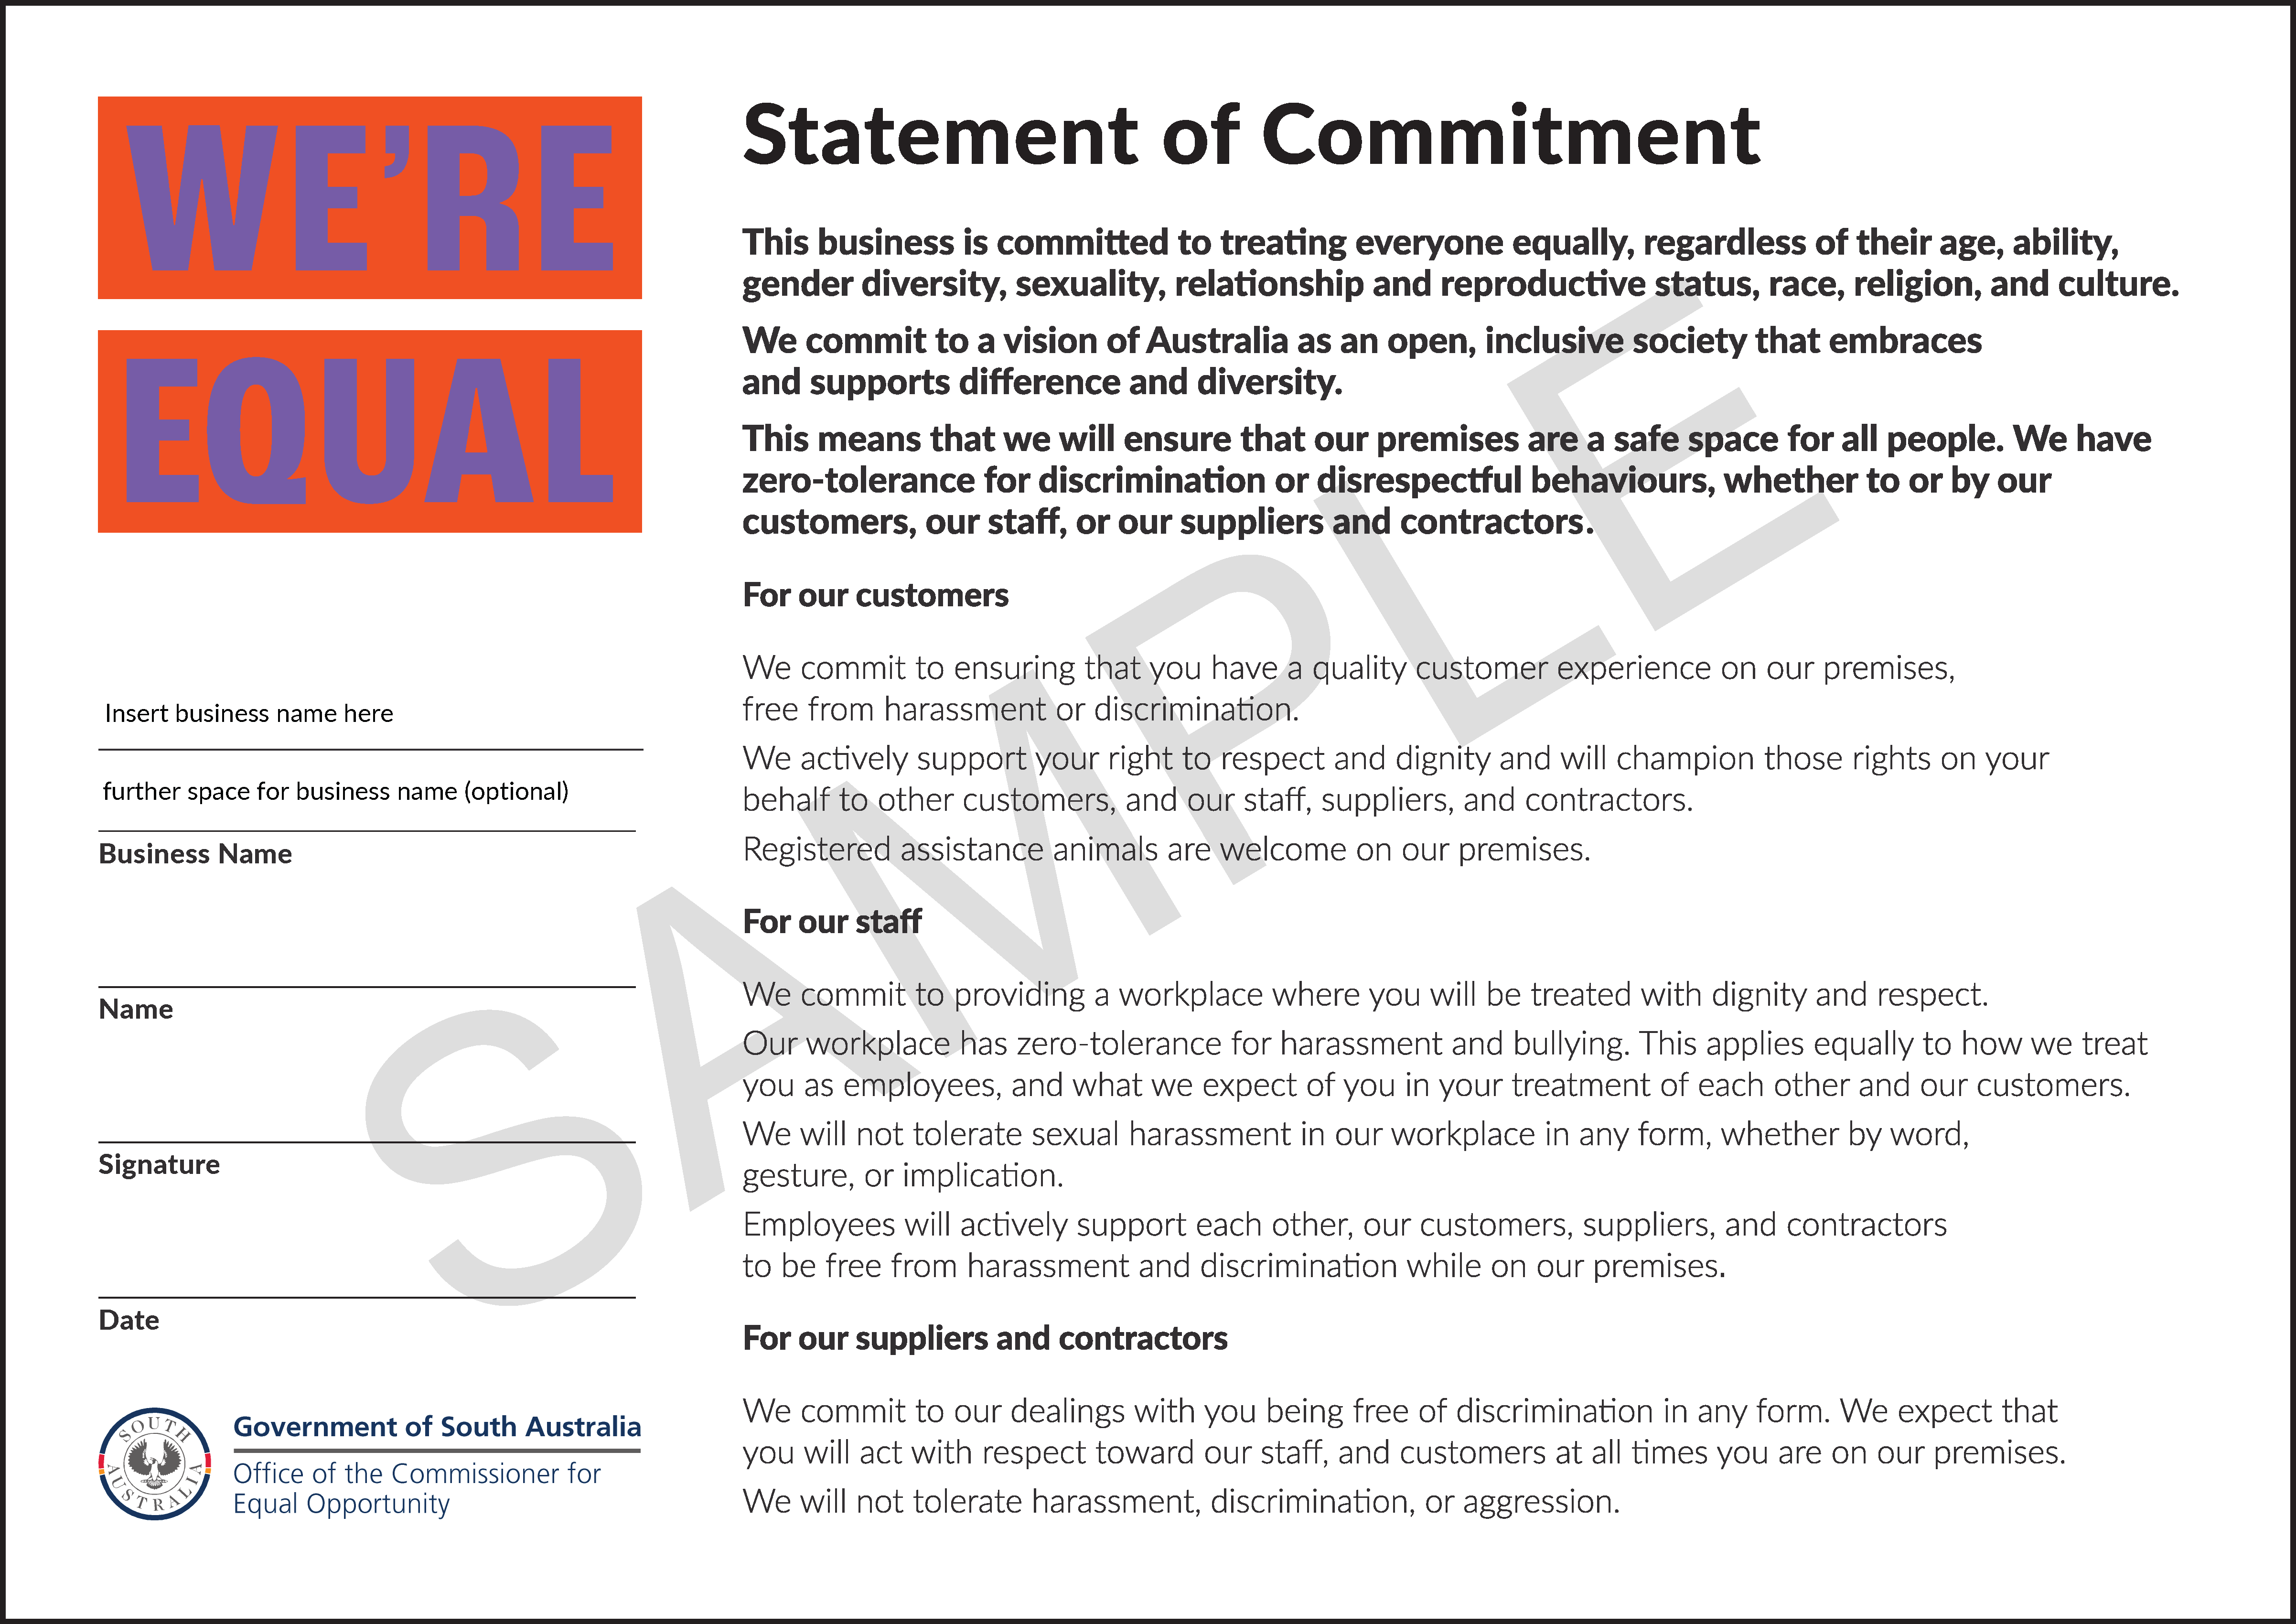 Image sample of the Statement of Commitment made by We're Equal businesses